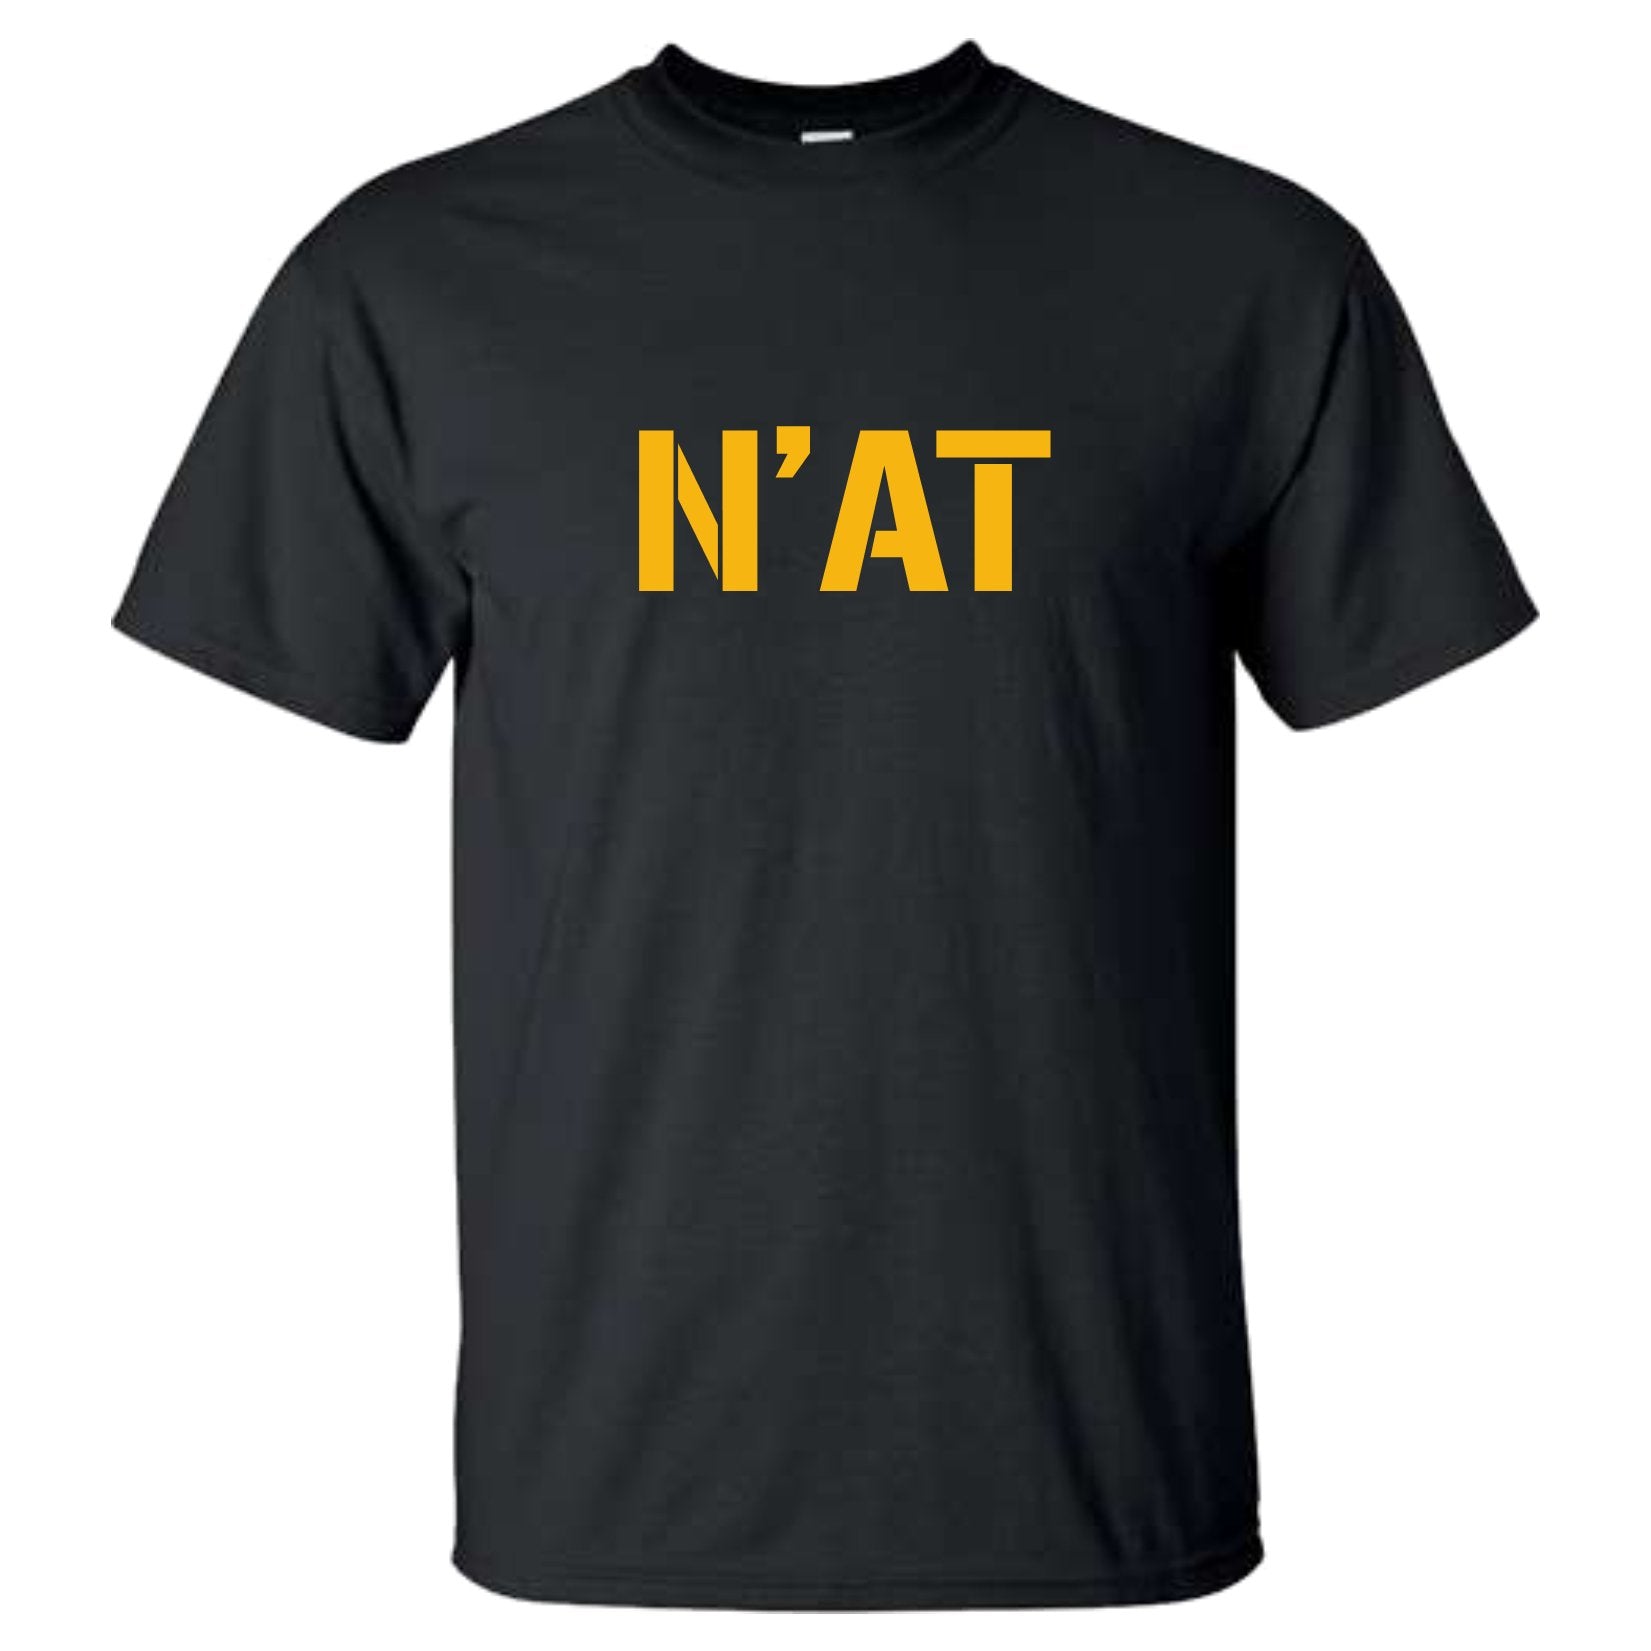 N'at TShirt, Pittsburghese T Shirt - Youth and Adult Sizes - SBS T Shop